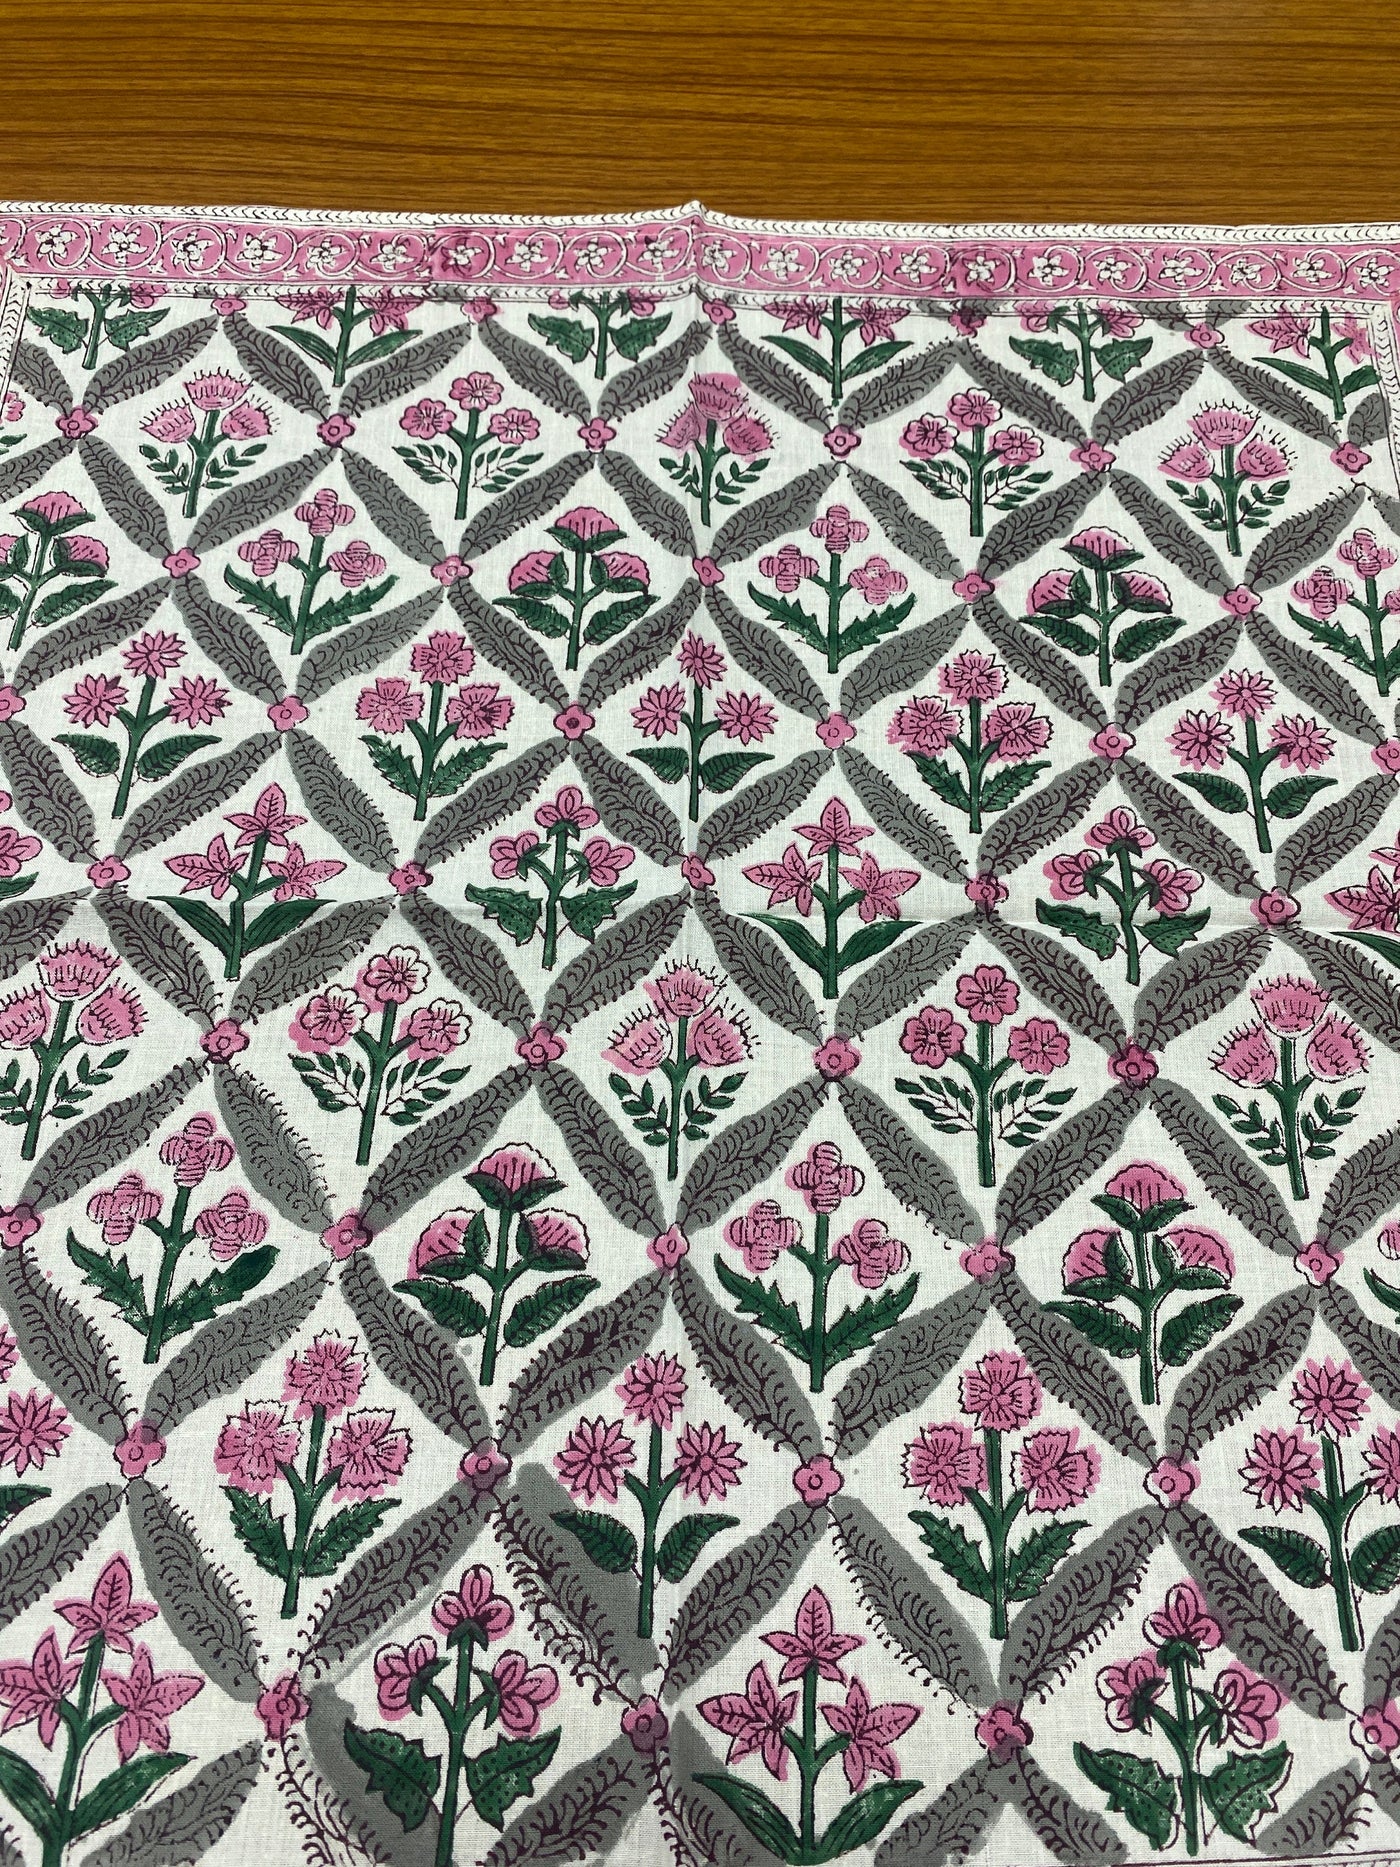 Watermelon Pink, Artichoke and Seaweed Green Indian Floral Hand Block Print Cotton Cloth Napkins Size 20x20" Wedding Events Home Party Gift